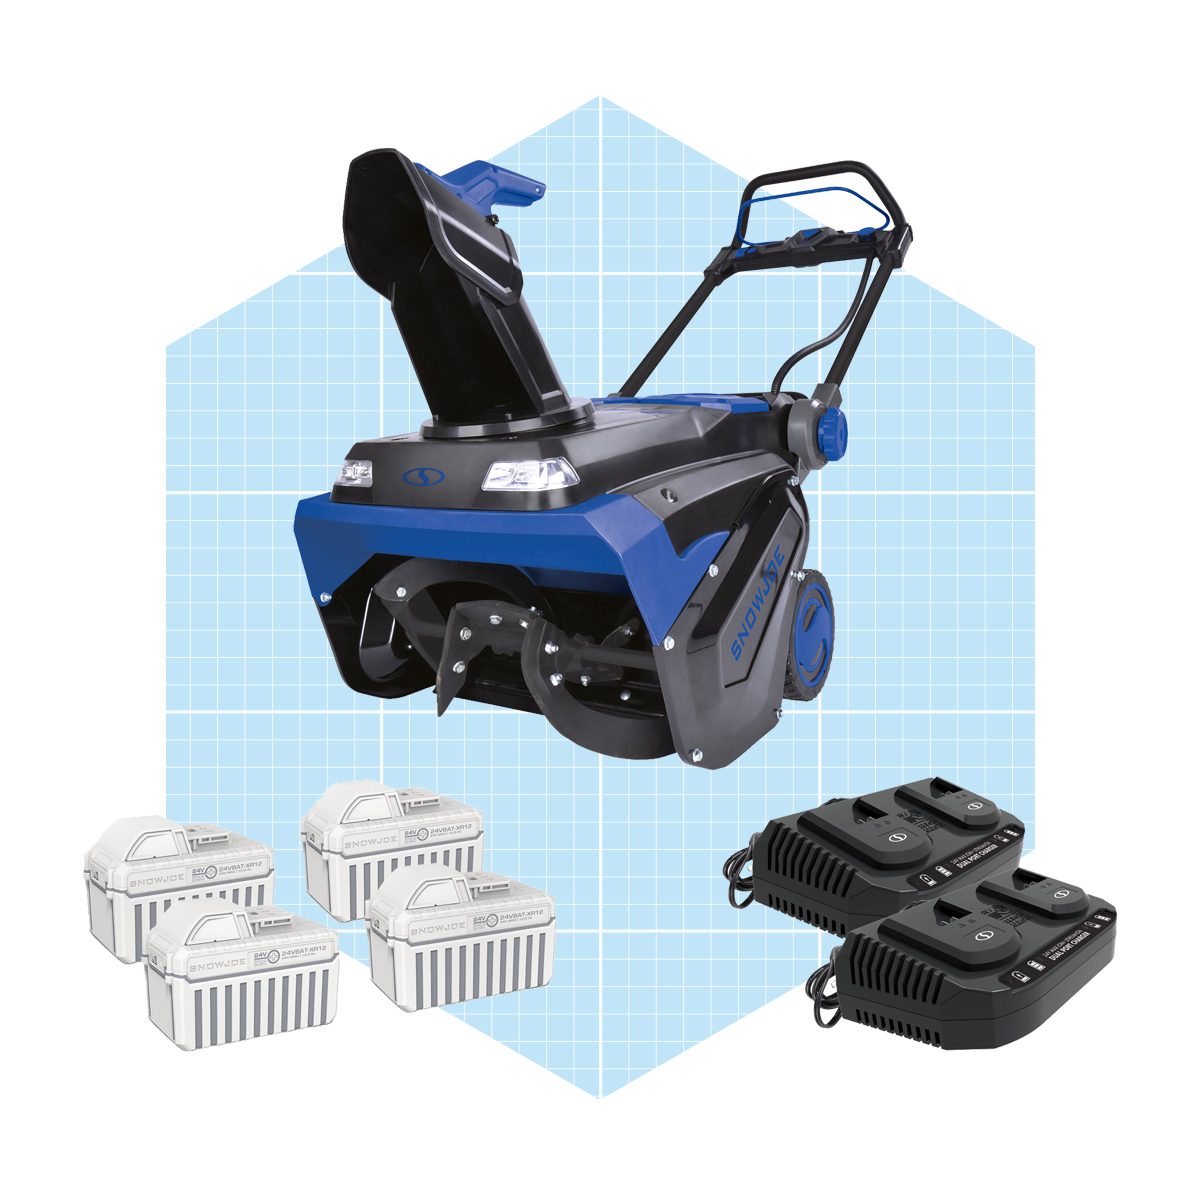 Snow Joe 96v Ion+ Brushless Cordless Single Stage Walk Behind Snow Blower Ecomm Lowes.com